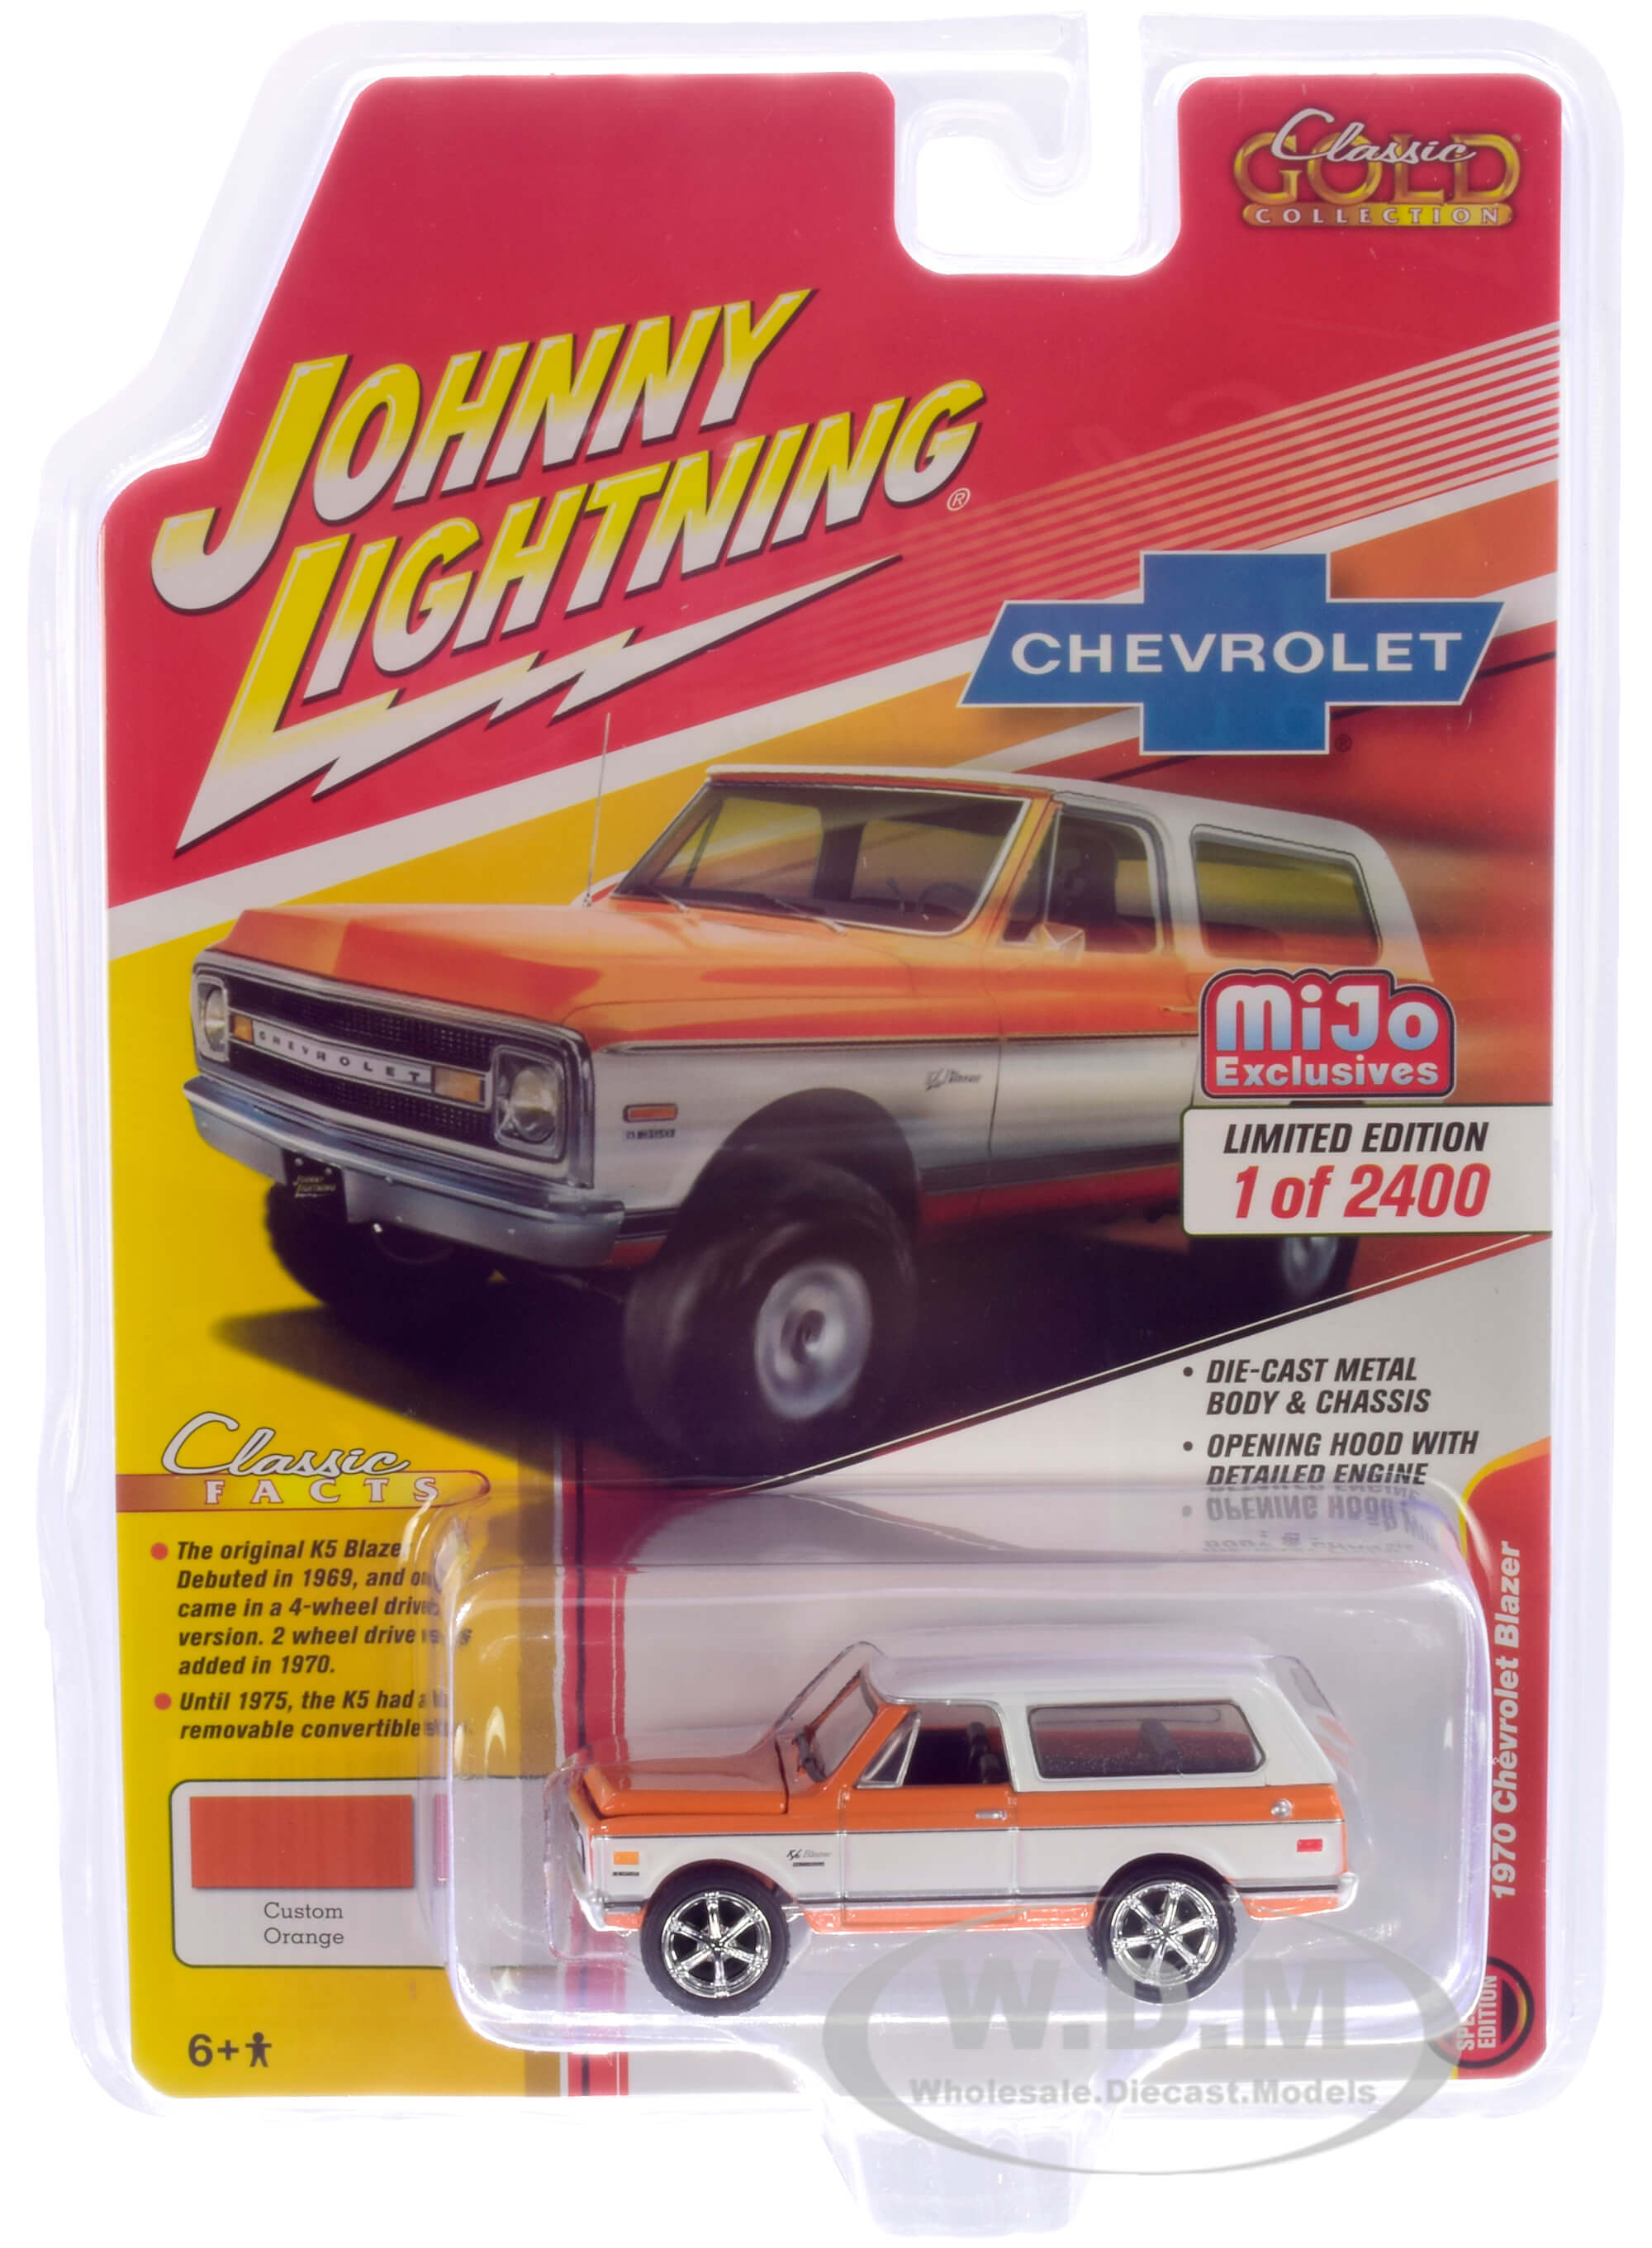 1970 Chevrolet Blazer Custom Orange And White Limited Edition To 2400 Pieces Worldwide 1/64 Diecast Model Car By Johnny Lightning